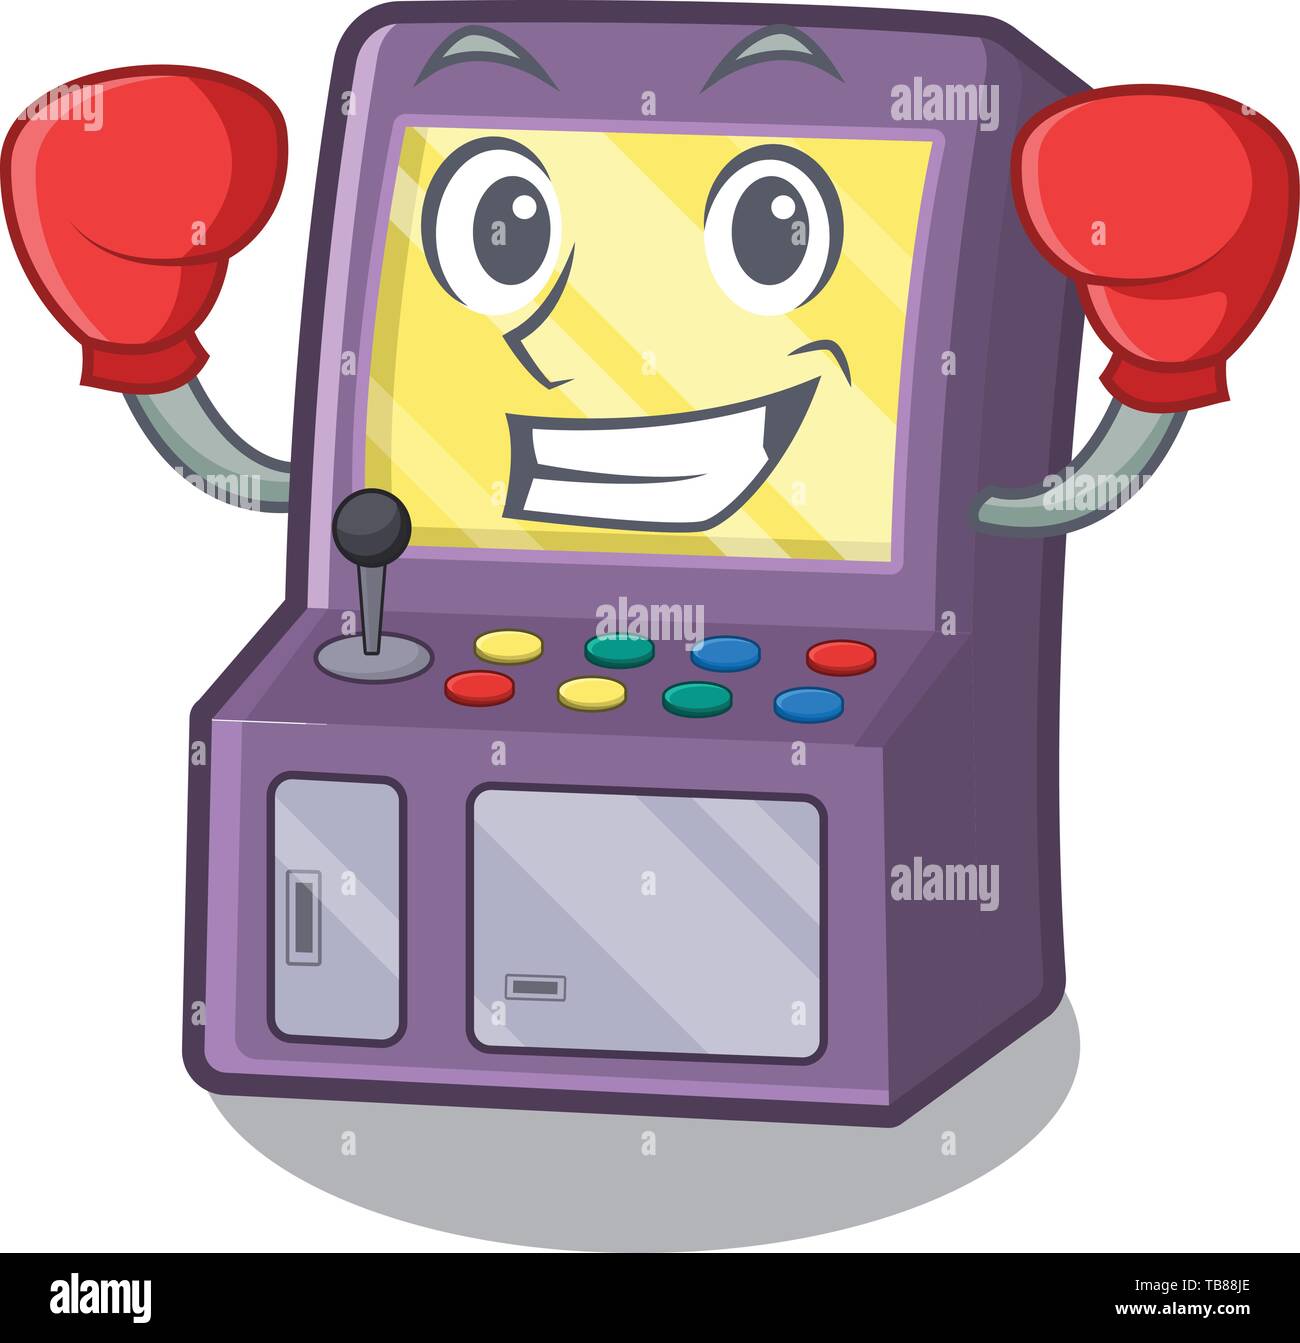 Boxing arcade machine isolated with the character Stock Vector Image ...